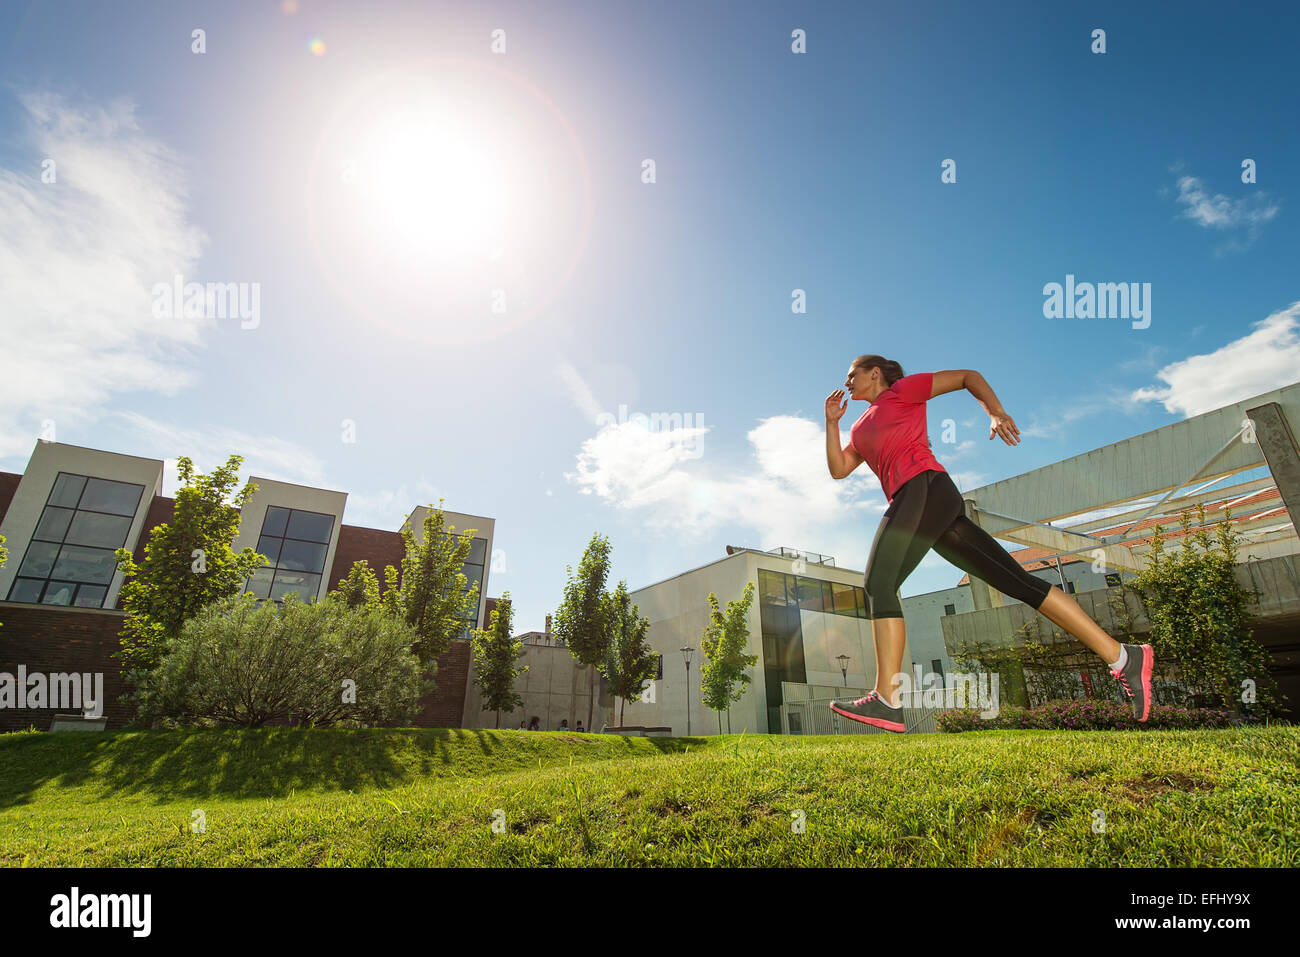 Running woman. outdoors, behind buildings Stock Photo